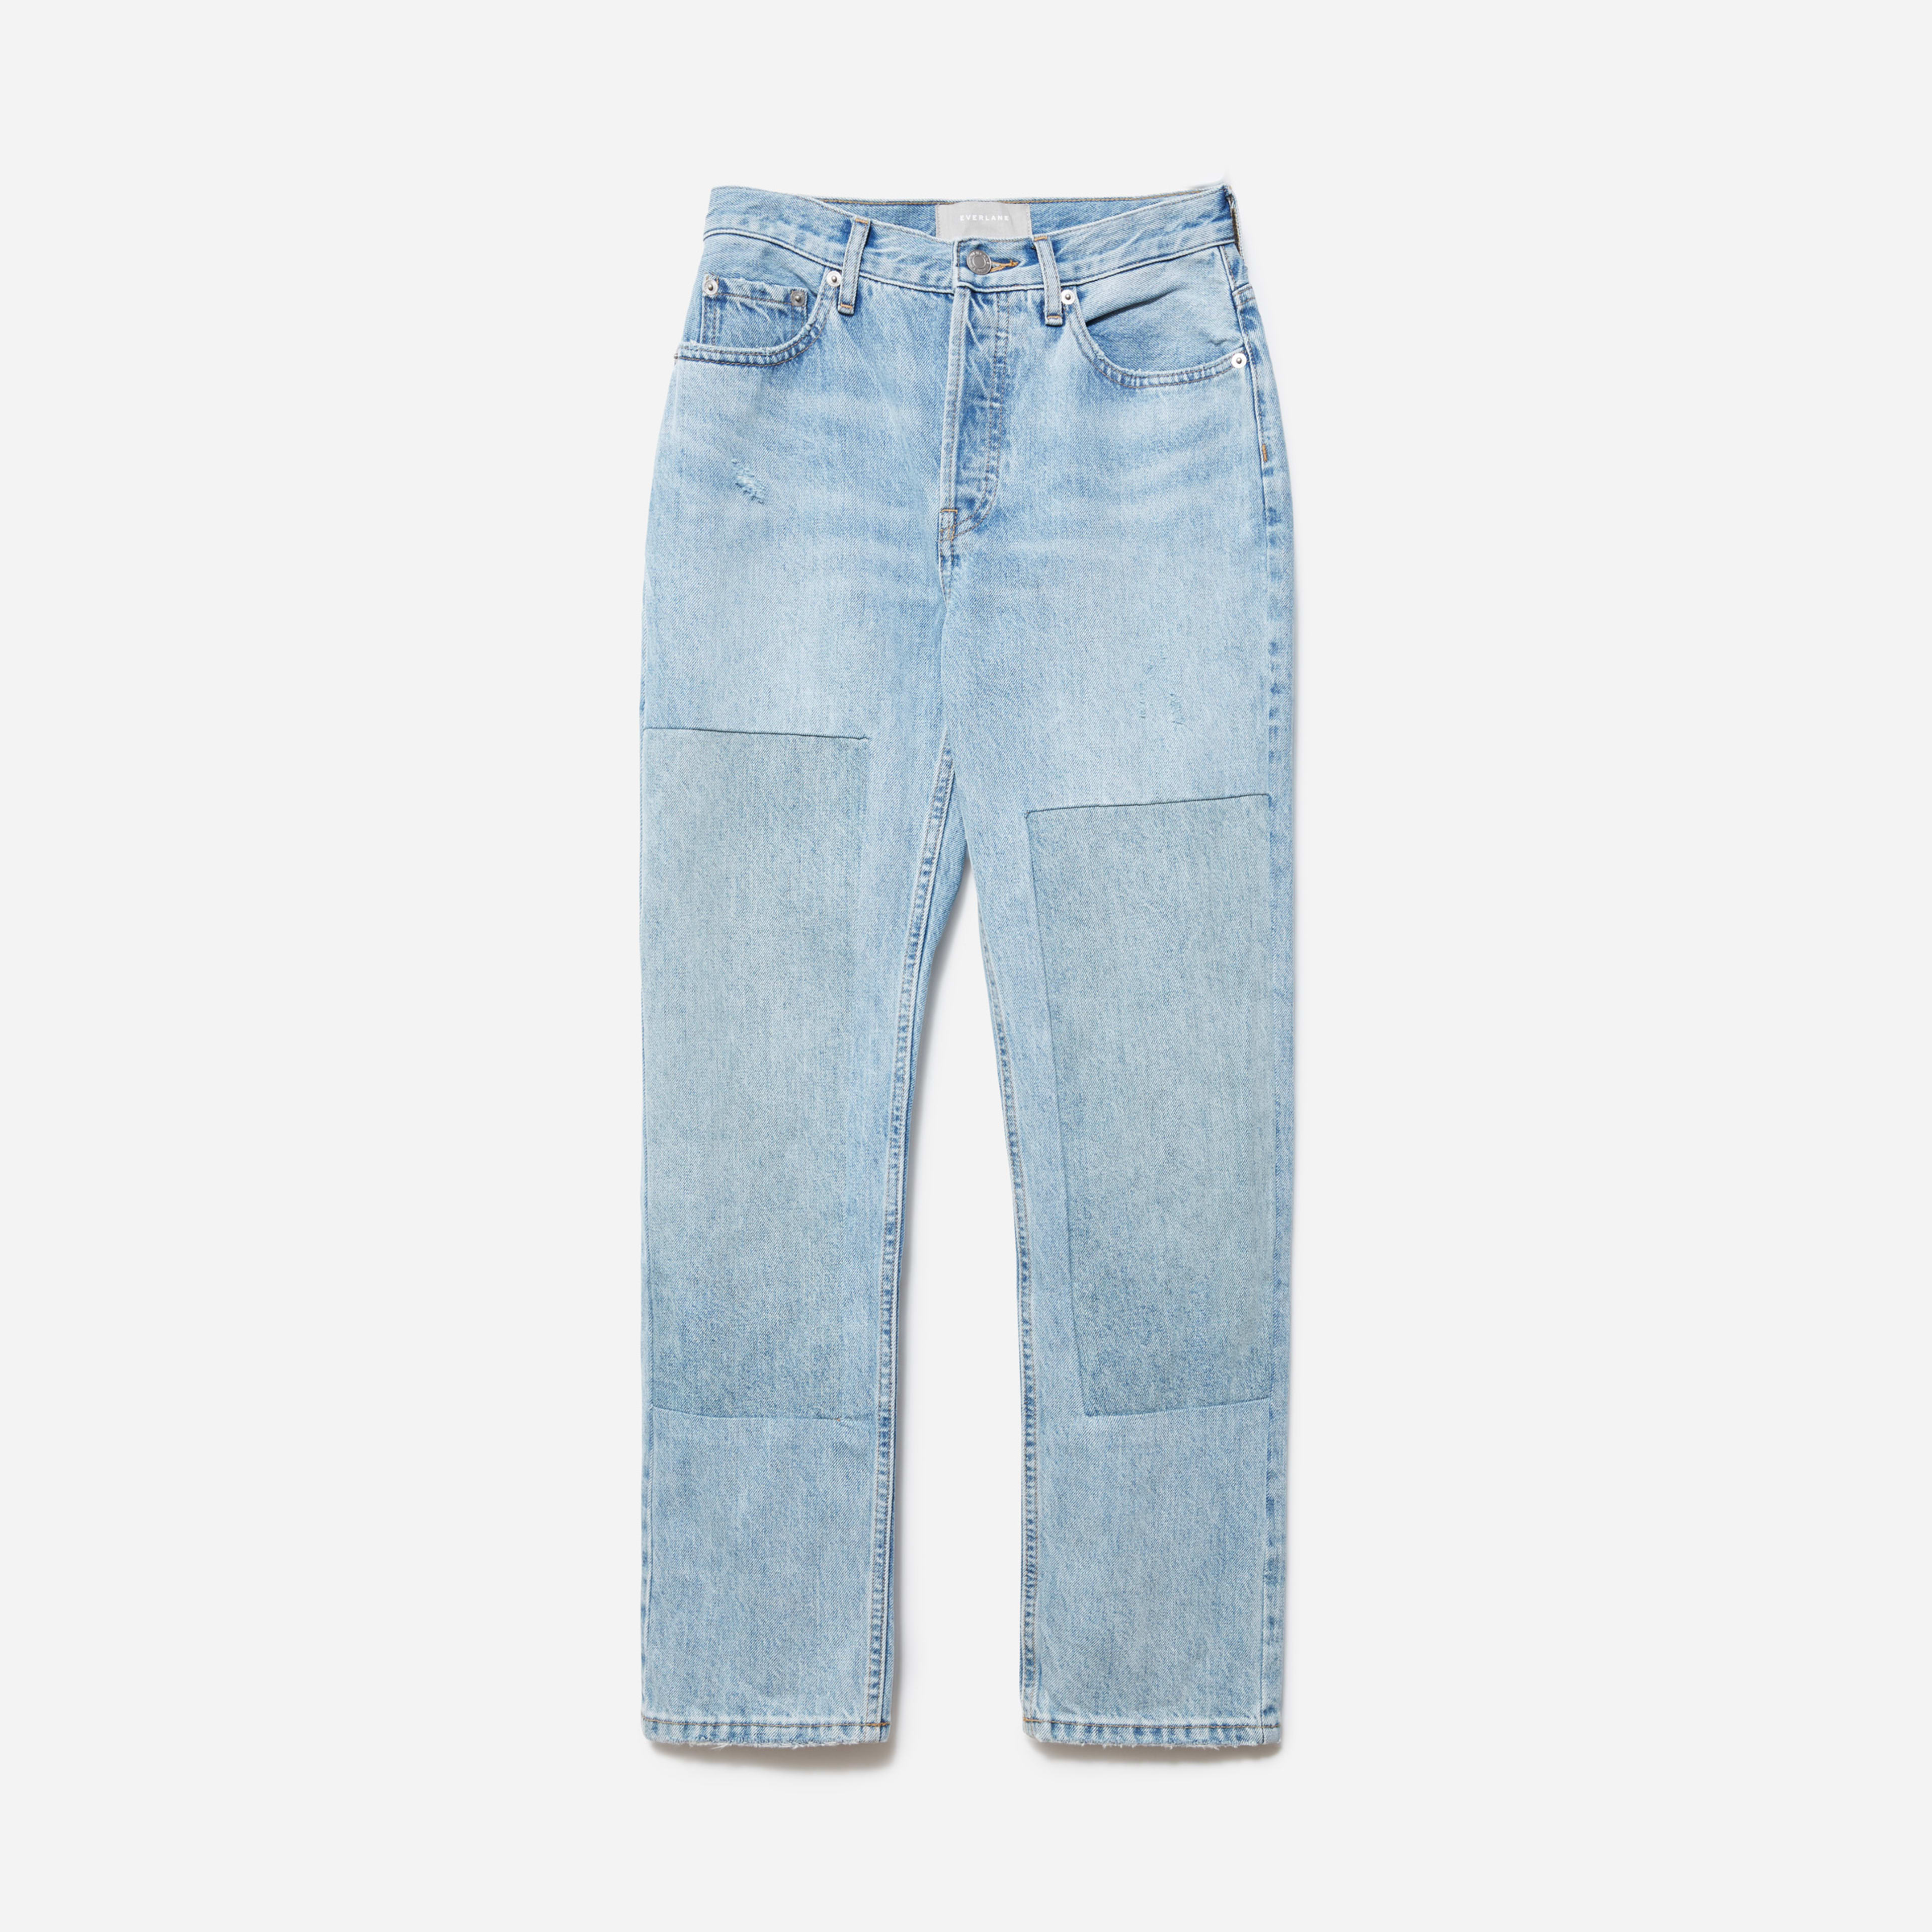 The ’90s Cheeky Jean Patched Blue – Everlane